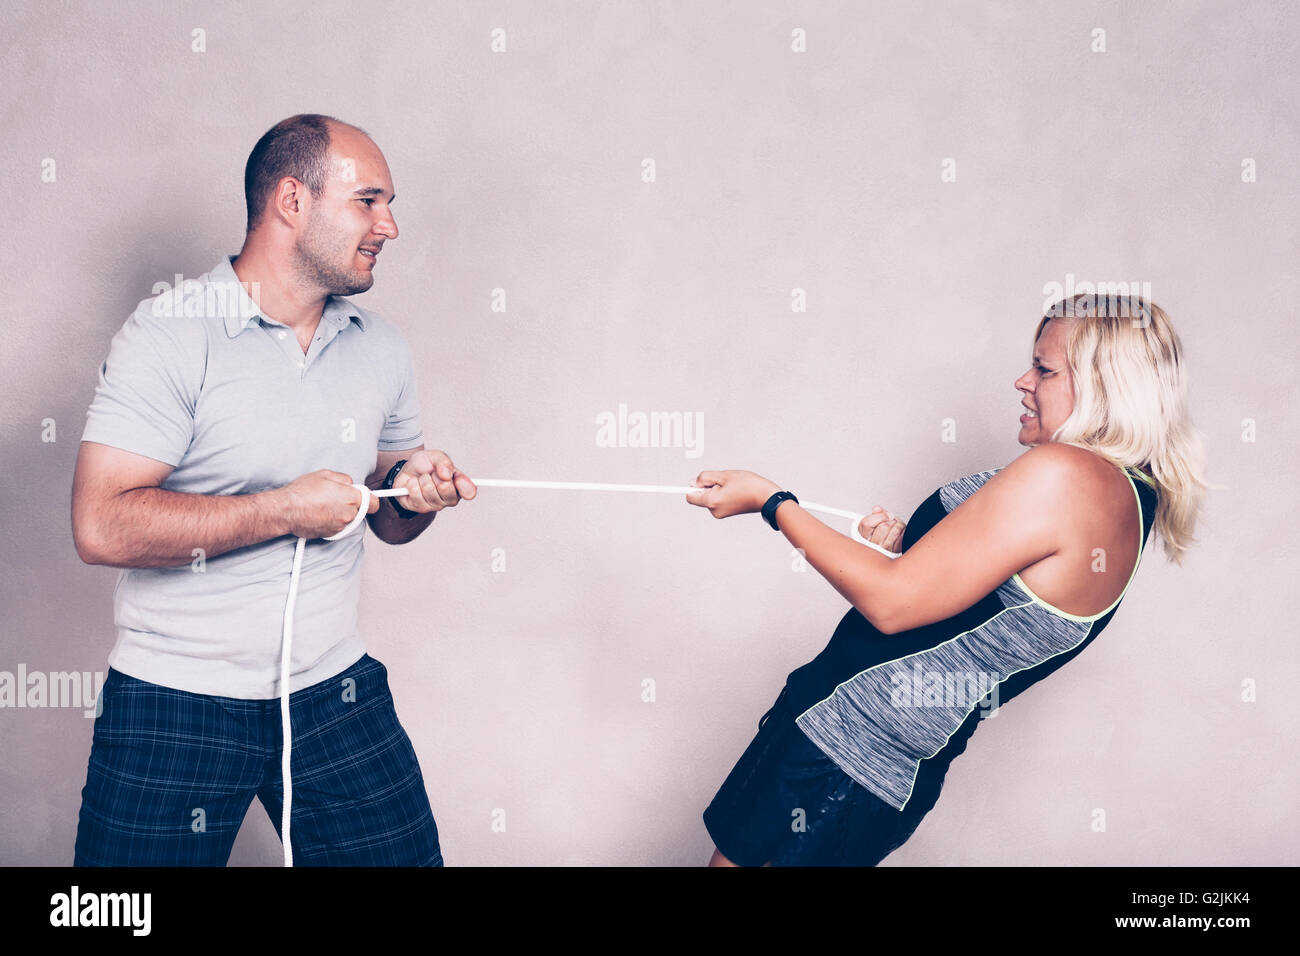 Man and determined sporty woman pulling a rope. Competition, determination and effort concept. Stock Photo